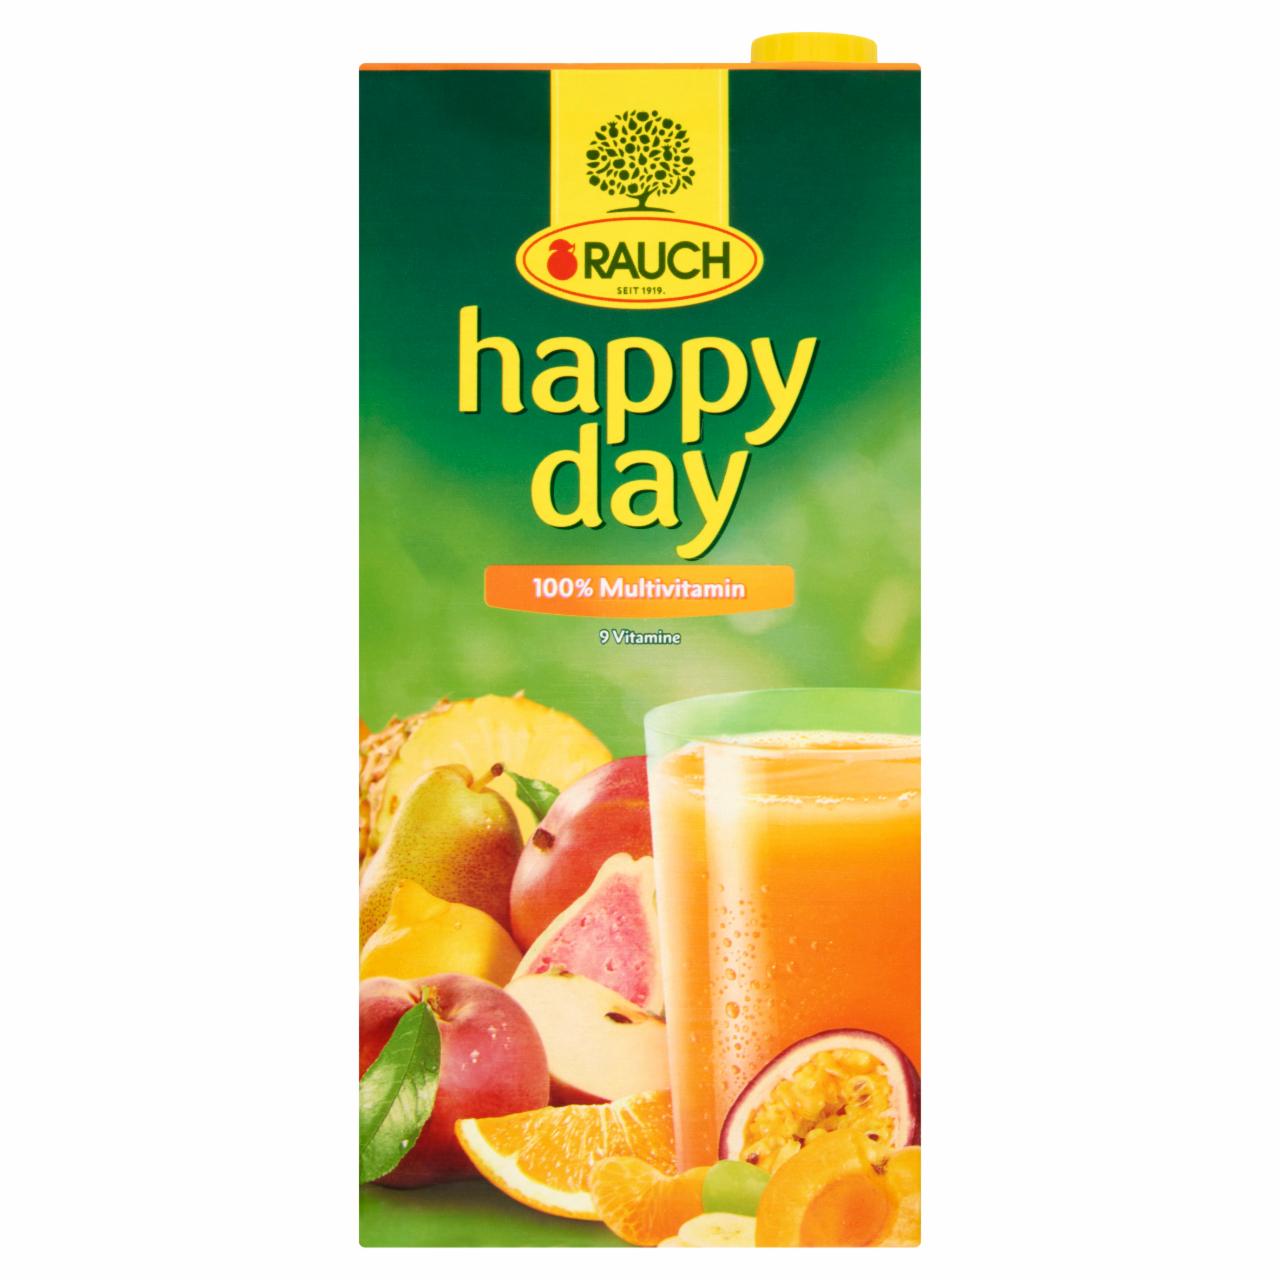 Photo - Rauch Happy Day 100% Multivitamin Juice from Concentrate and Puree Concentrate with 9 vitamins 2 l